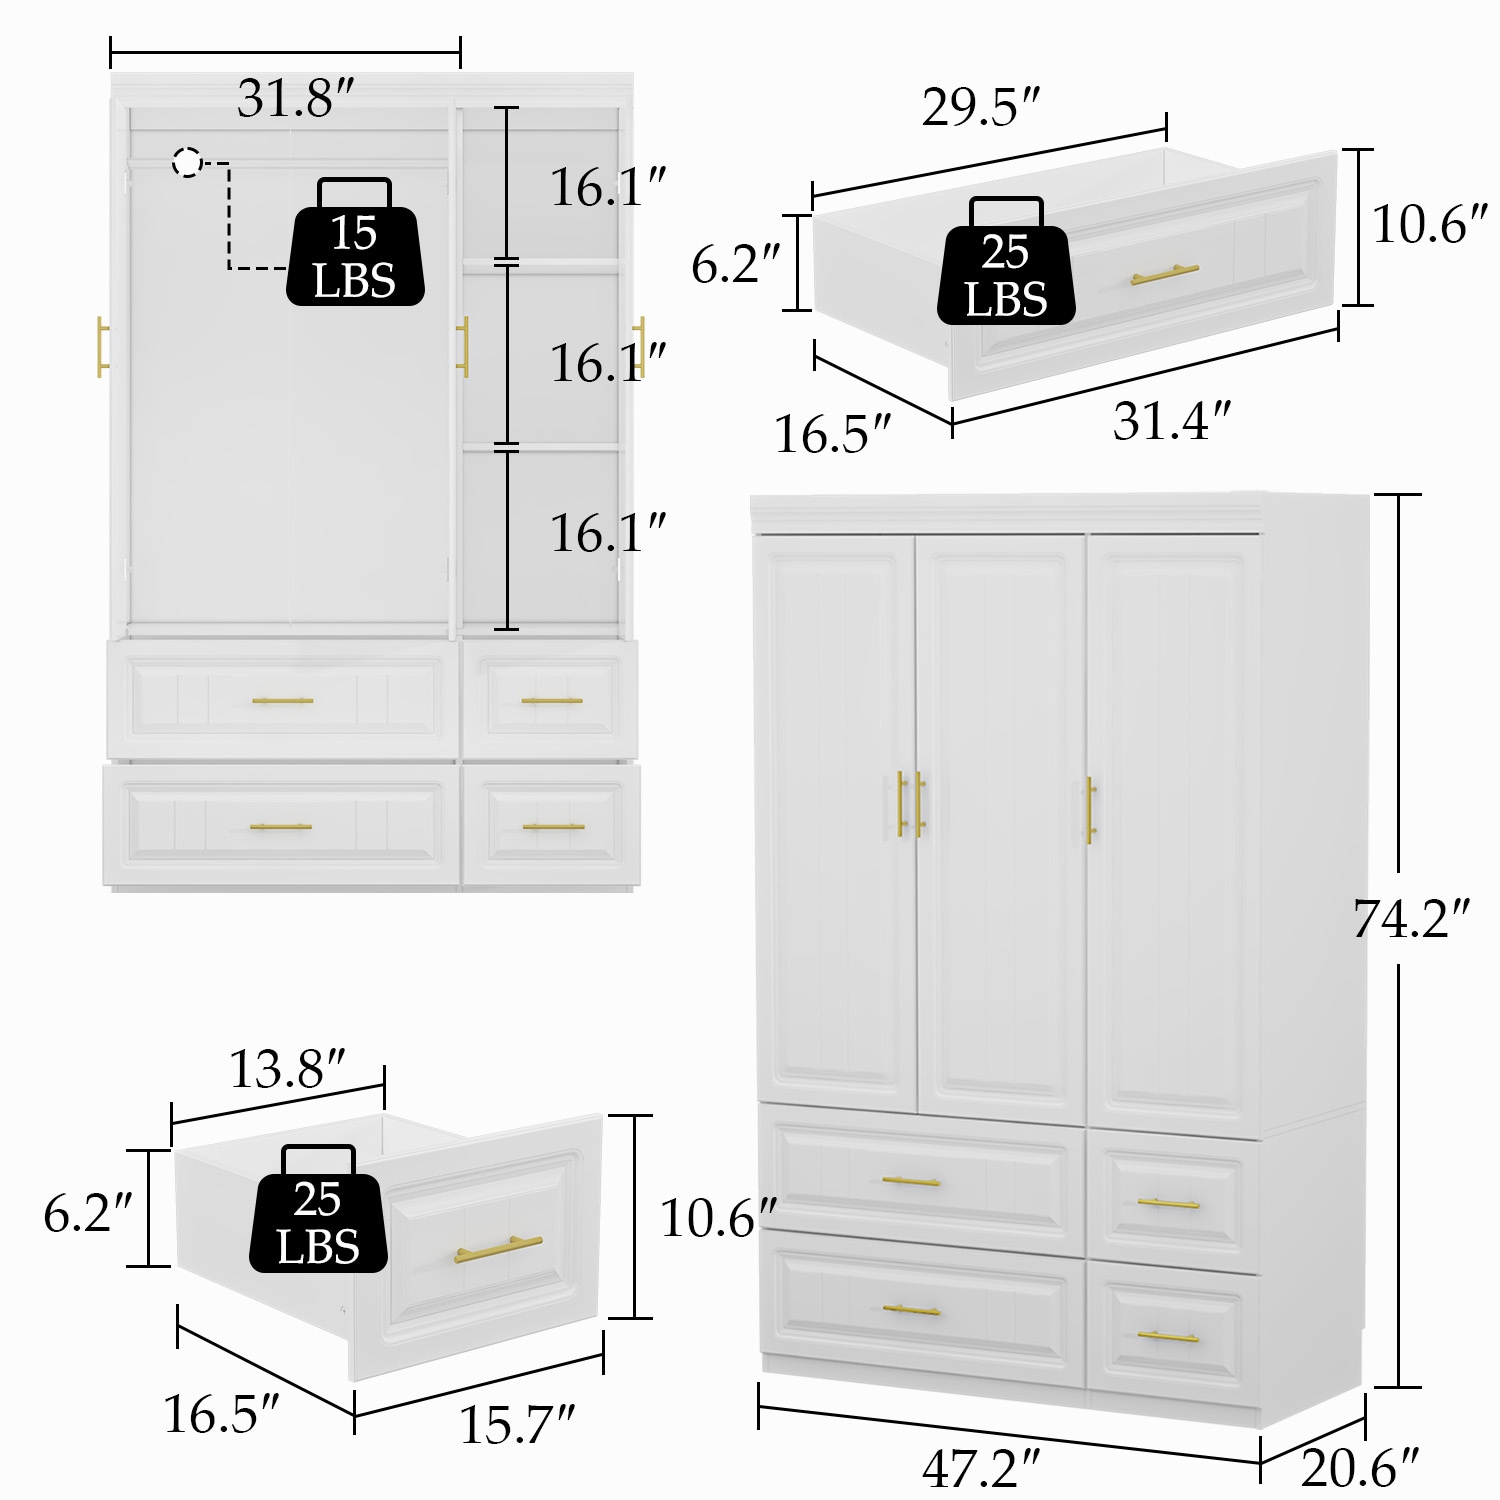 Finish, in Storage White Contemporary the Slide 4 Drawers - with Rails Closet Metal department Wardrobe Armoires FUFU&GAGA 3-Door at Multiple Spaces and